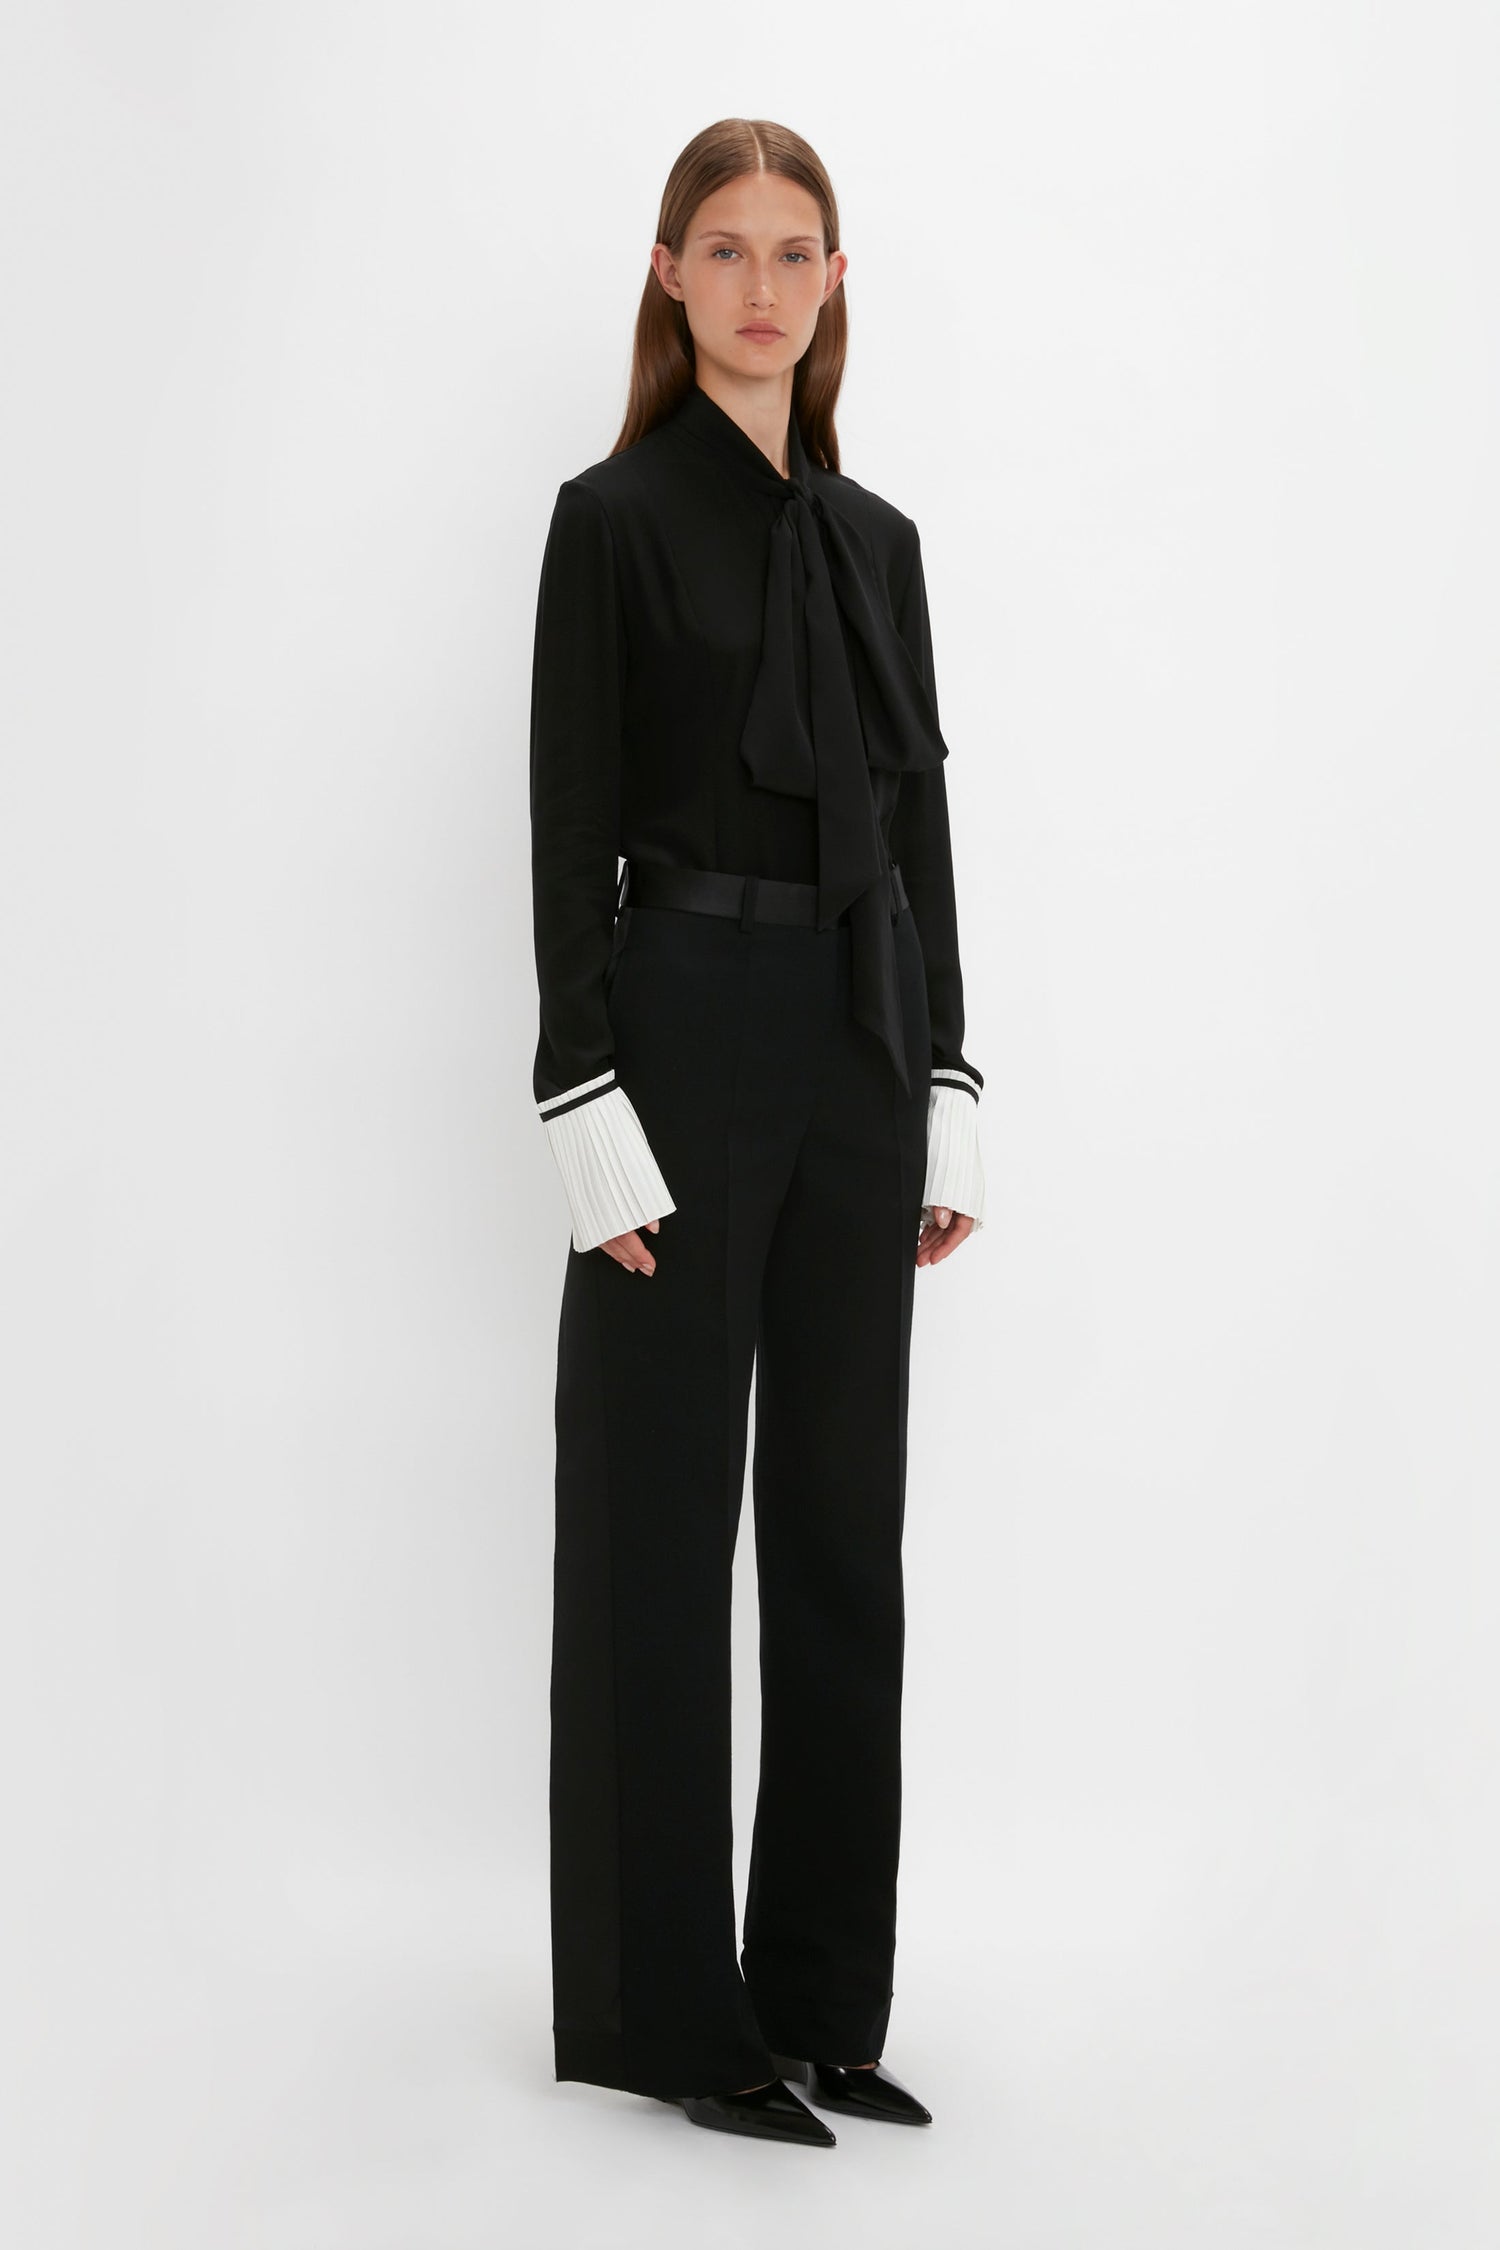 A person stands against a plain white background wearing a Pleat Cuff Blouse In Black by Victoria Beckham, long black pants, and pointed-toe black shoes.